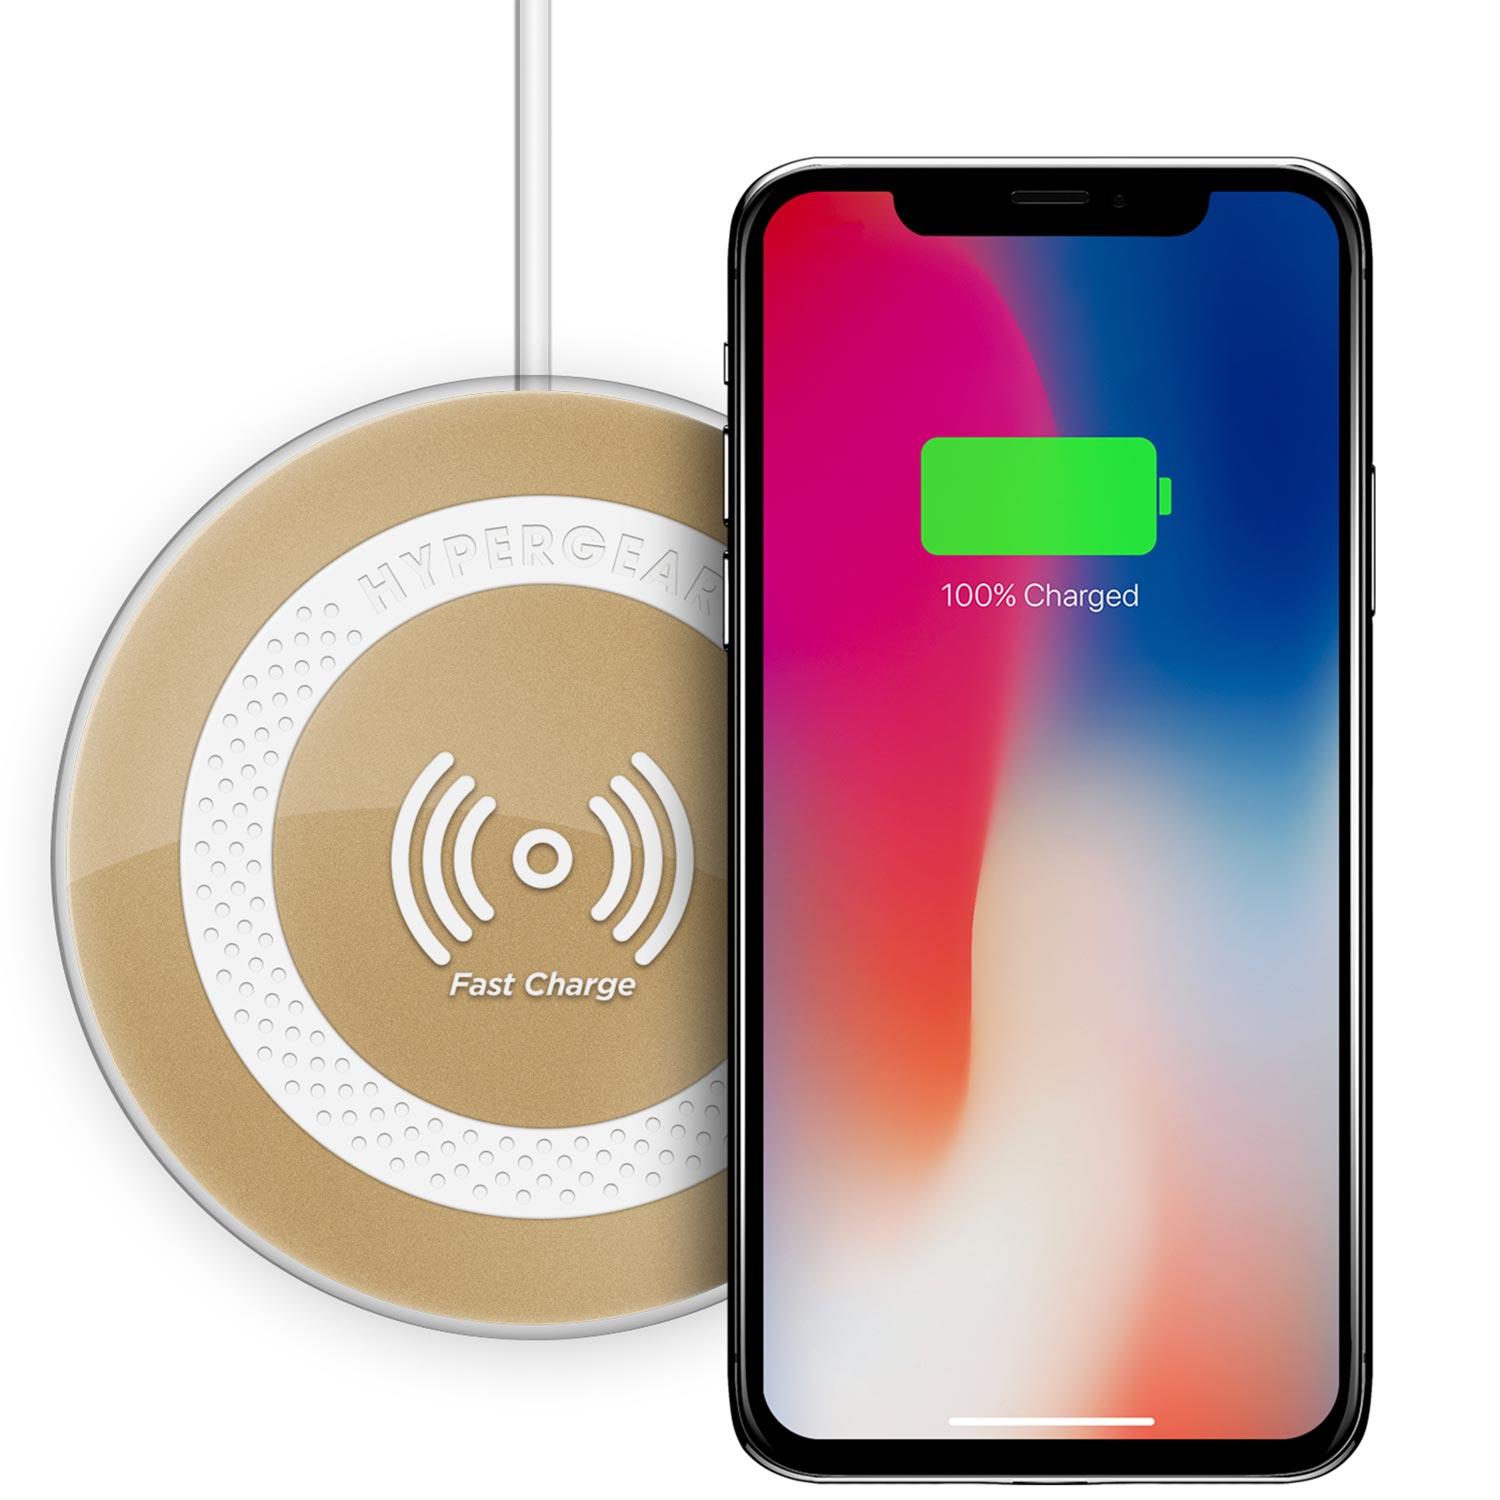 ChargePad Pro Wireless Fast Charger